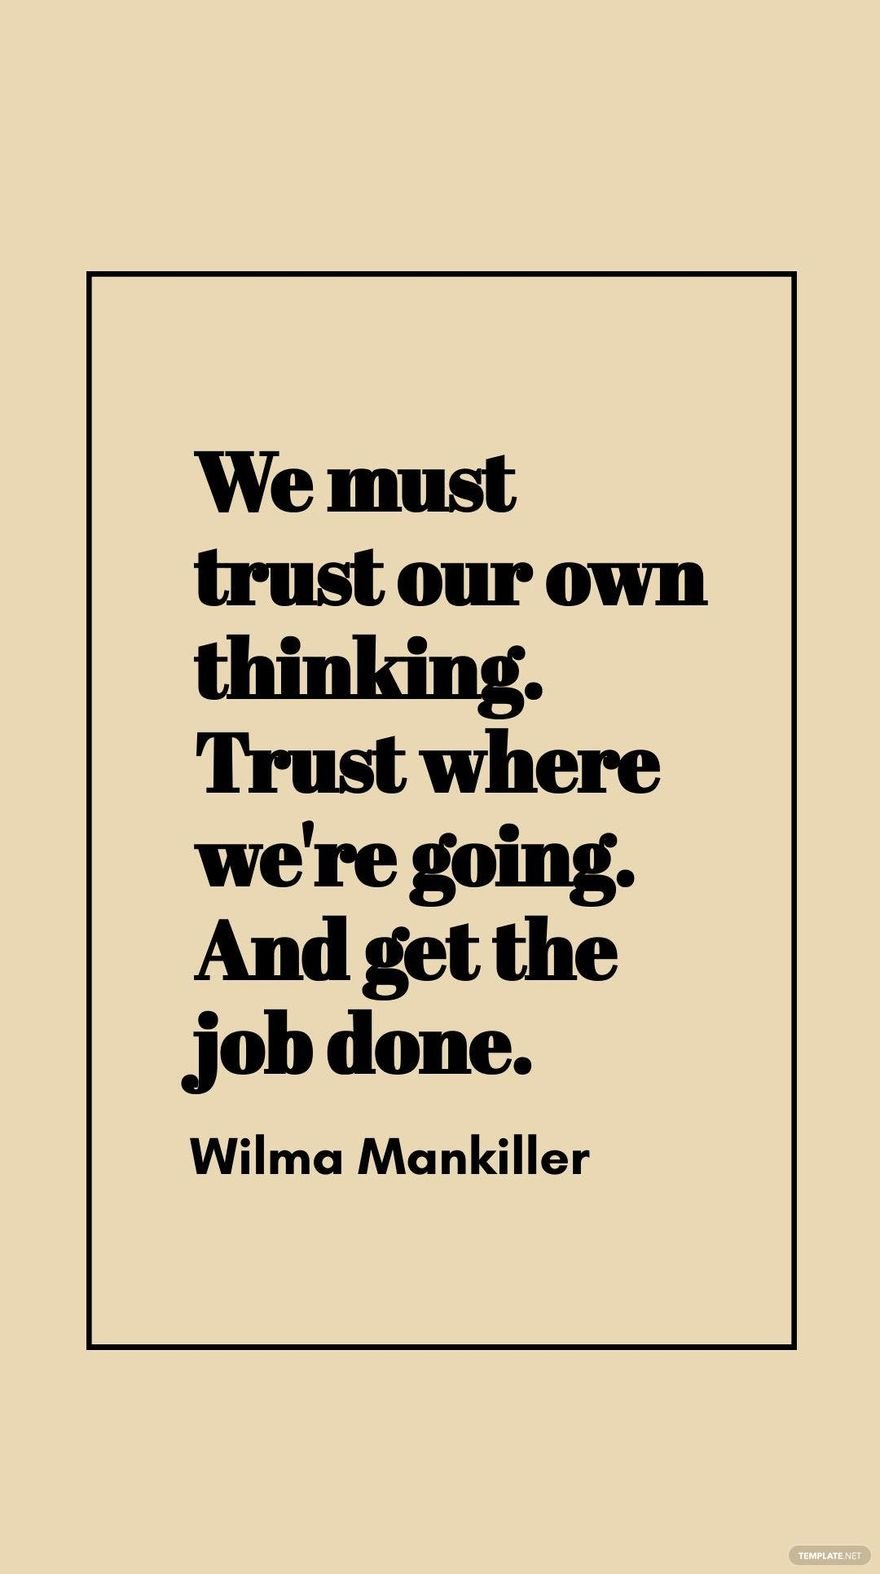 Wilma Mankiller - We must trust our own thinking. Trust where we're going. And get the job done.